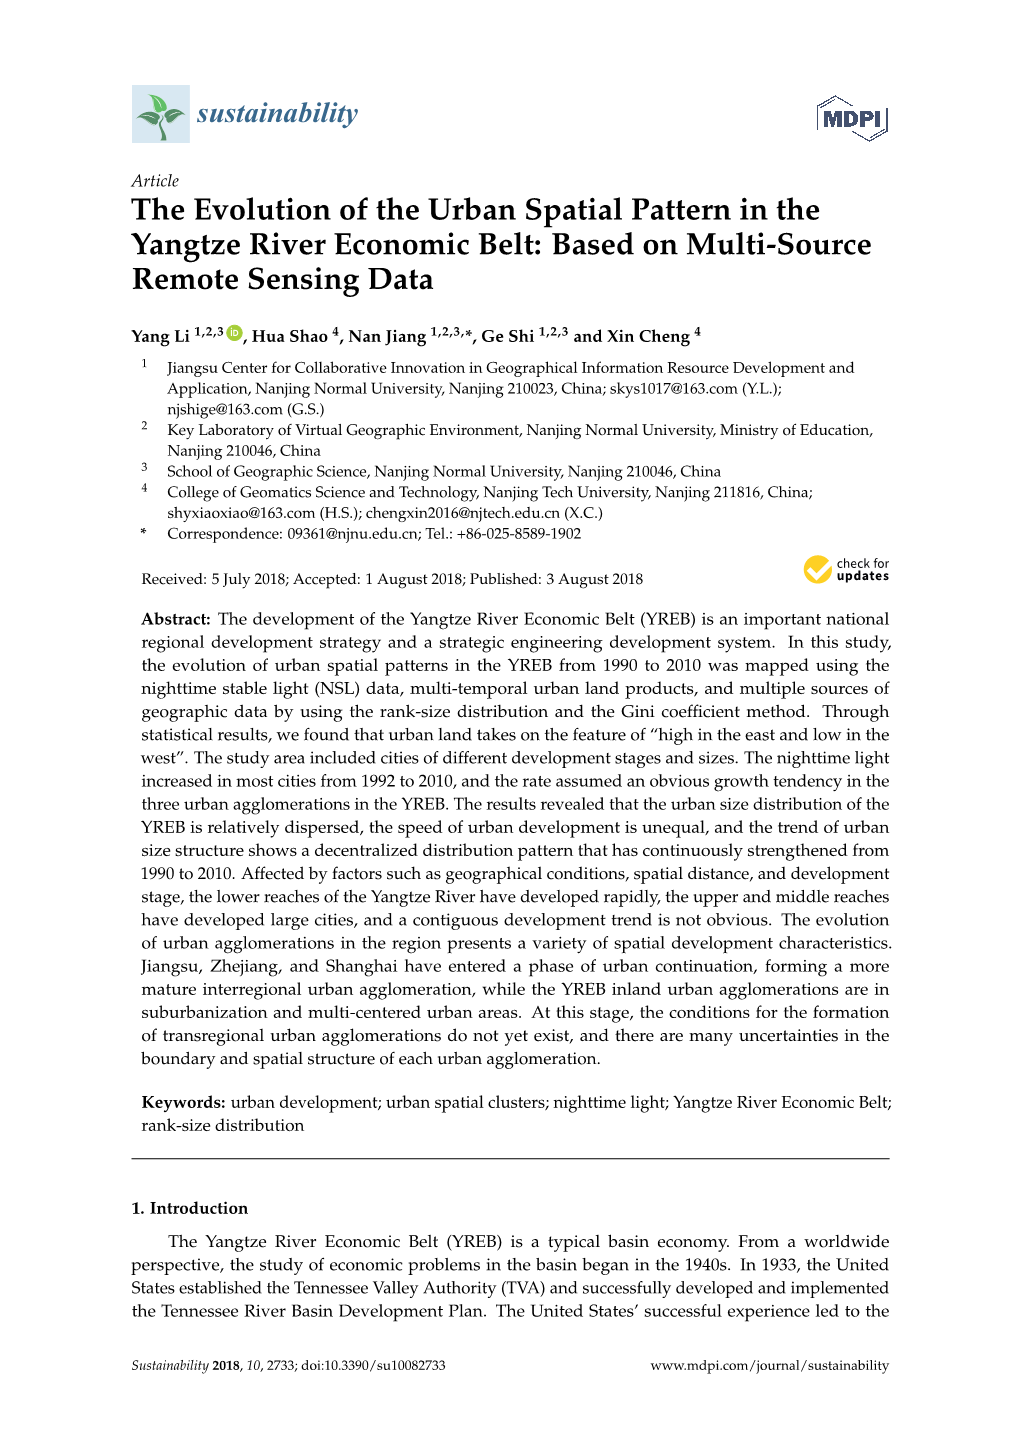 The Evolution of the Urban Spatial Pattern in the Yangtze River Economic Belt: Based on Multi-Source Remote Sensing Data